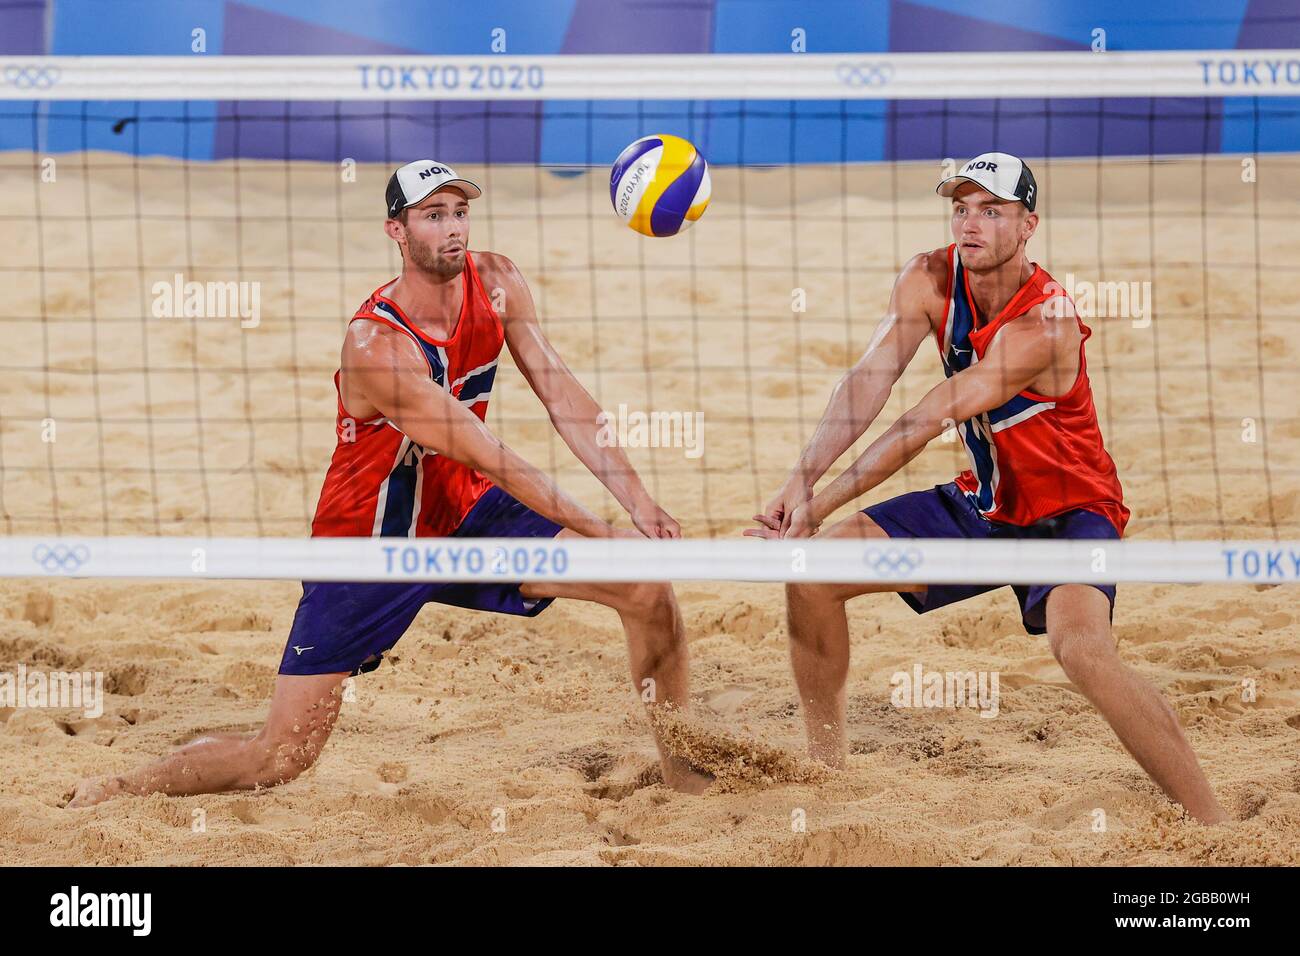 TOKYO, JAPAN - AUGUST 1: Anders Bermtsen Mol of Norway and Christian Sandlie Sorum of Norway competing on Men's Round 16 during the Tokyo 2020 Olympic Games at the Shiokaze Park on August 1, 2021 in Tokyo, Japan (Photo by Pim Waslander/Orange Pictures) NOCNSF Stock Photo